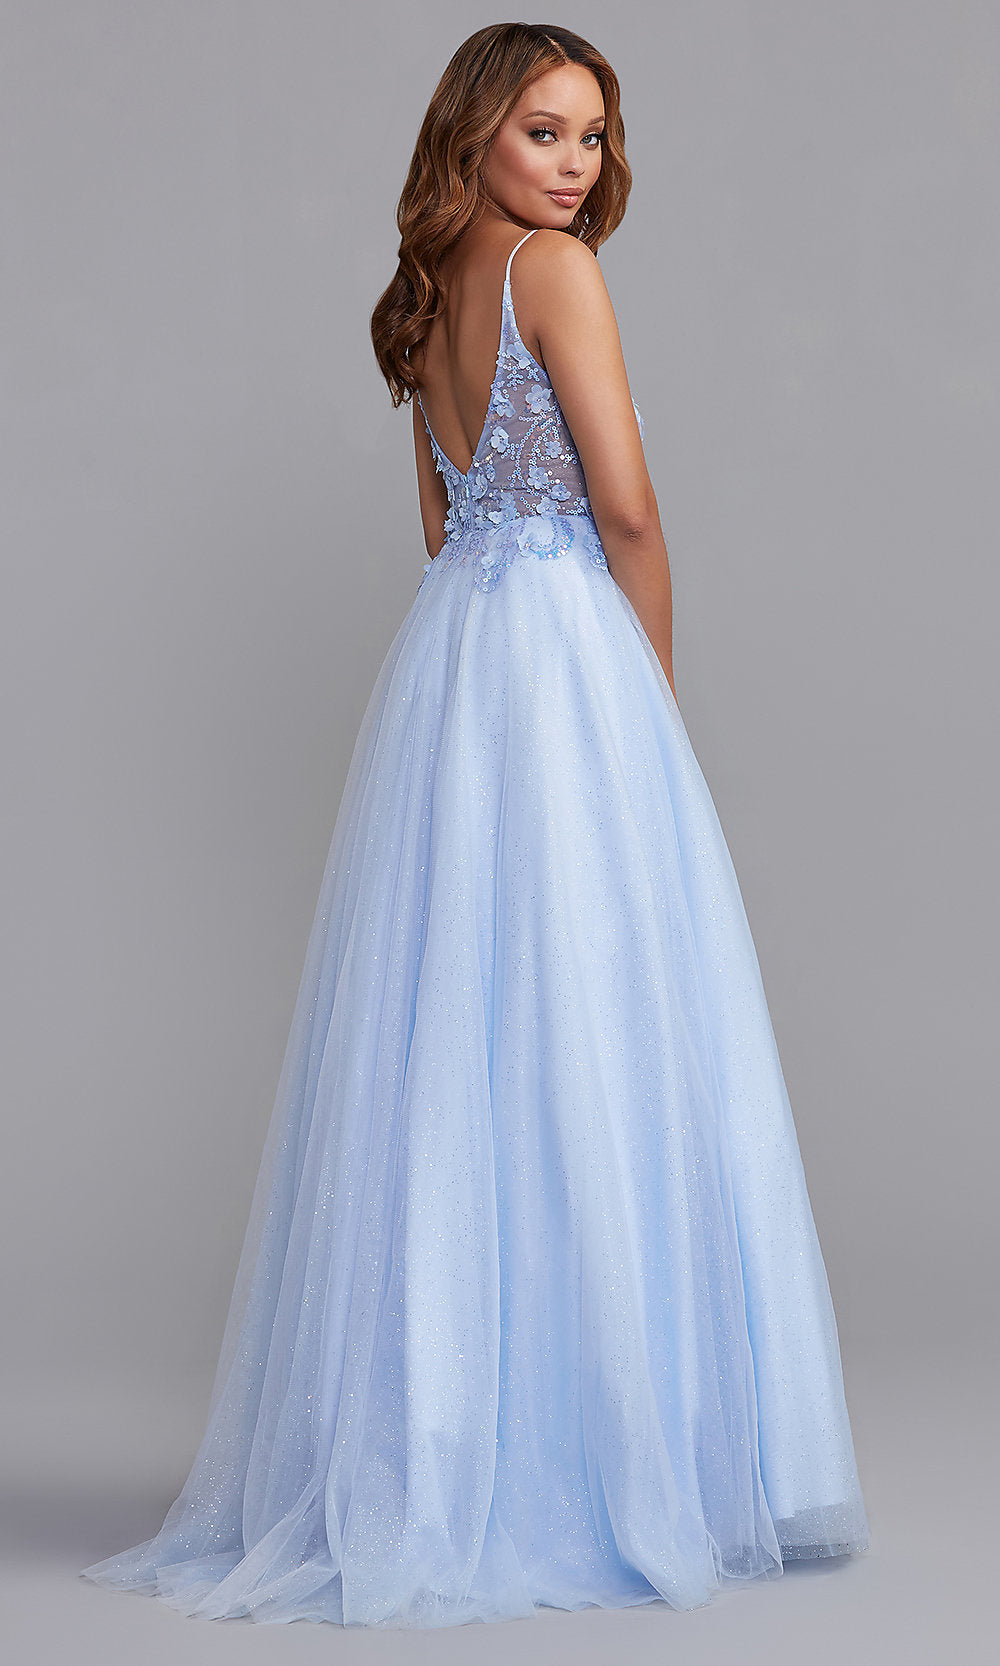  Sequin-Bodice Long Glitter Prom Ball Gown